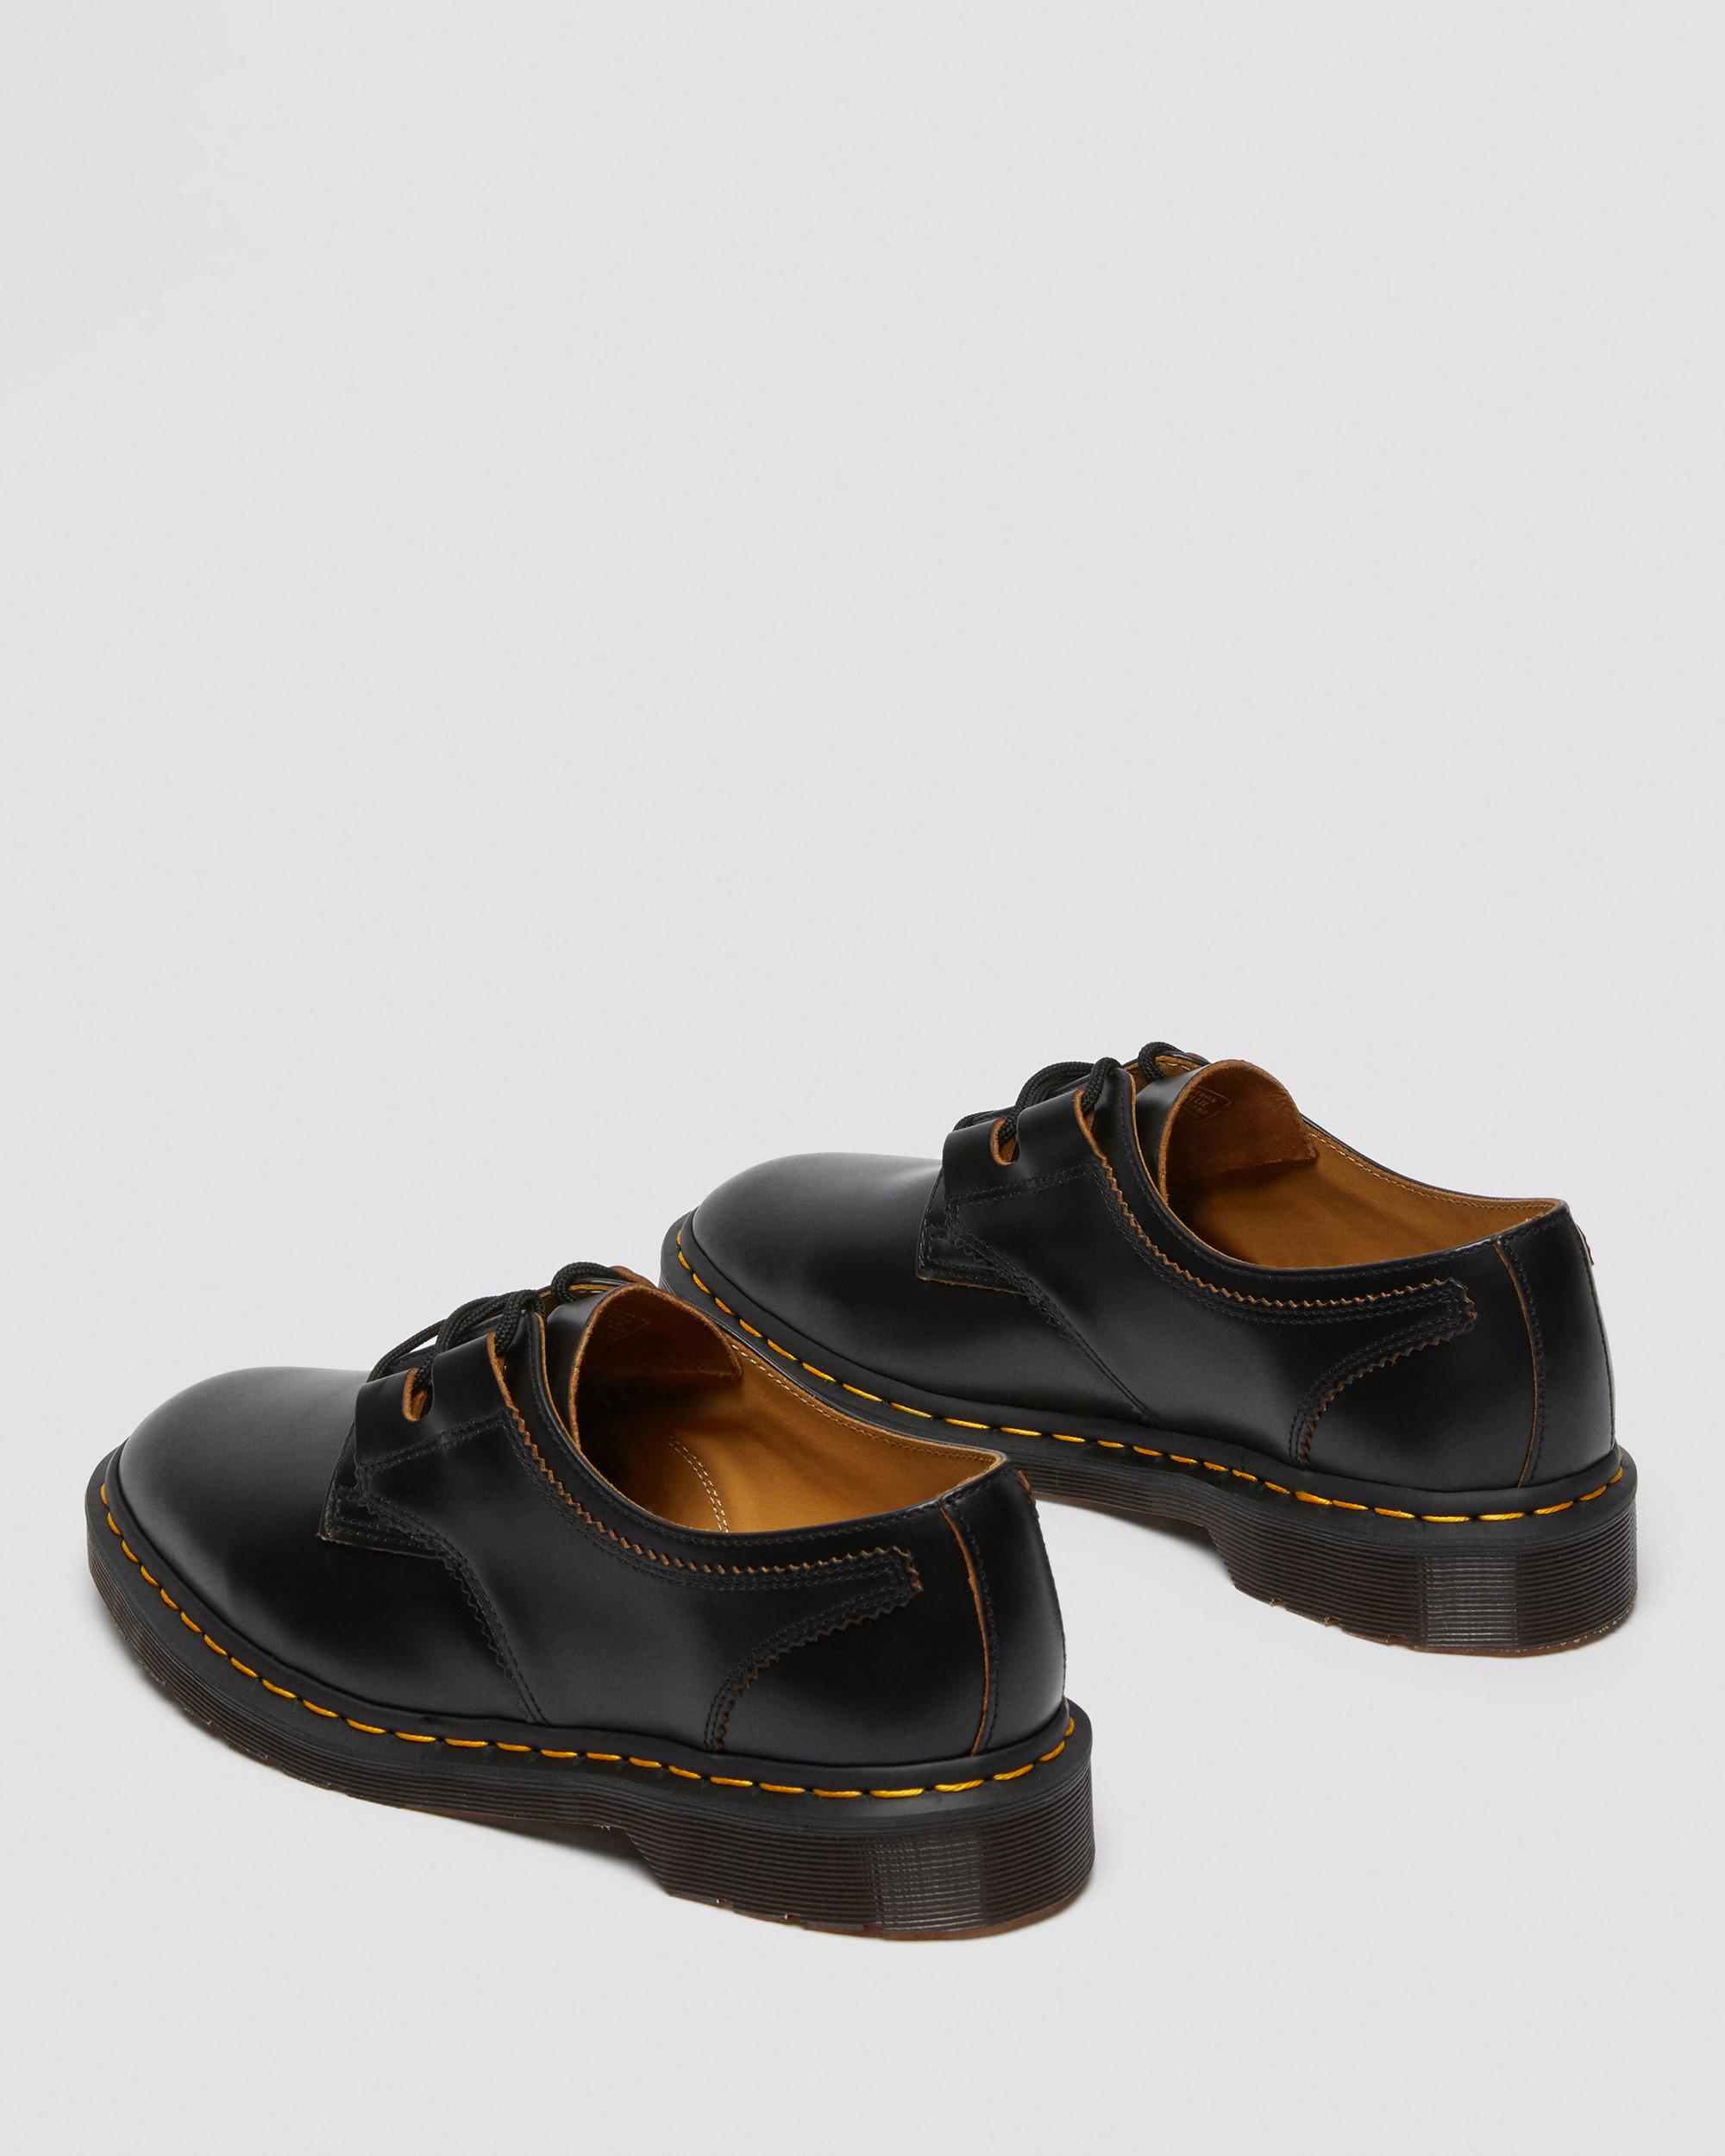 DR MARTENS 1461 Ghillie Leather Oxford Shoes